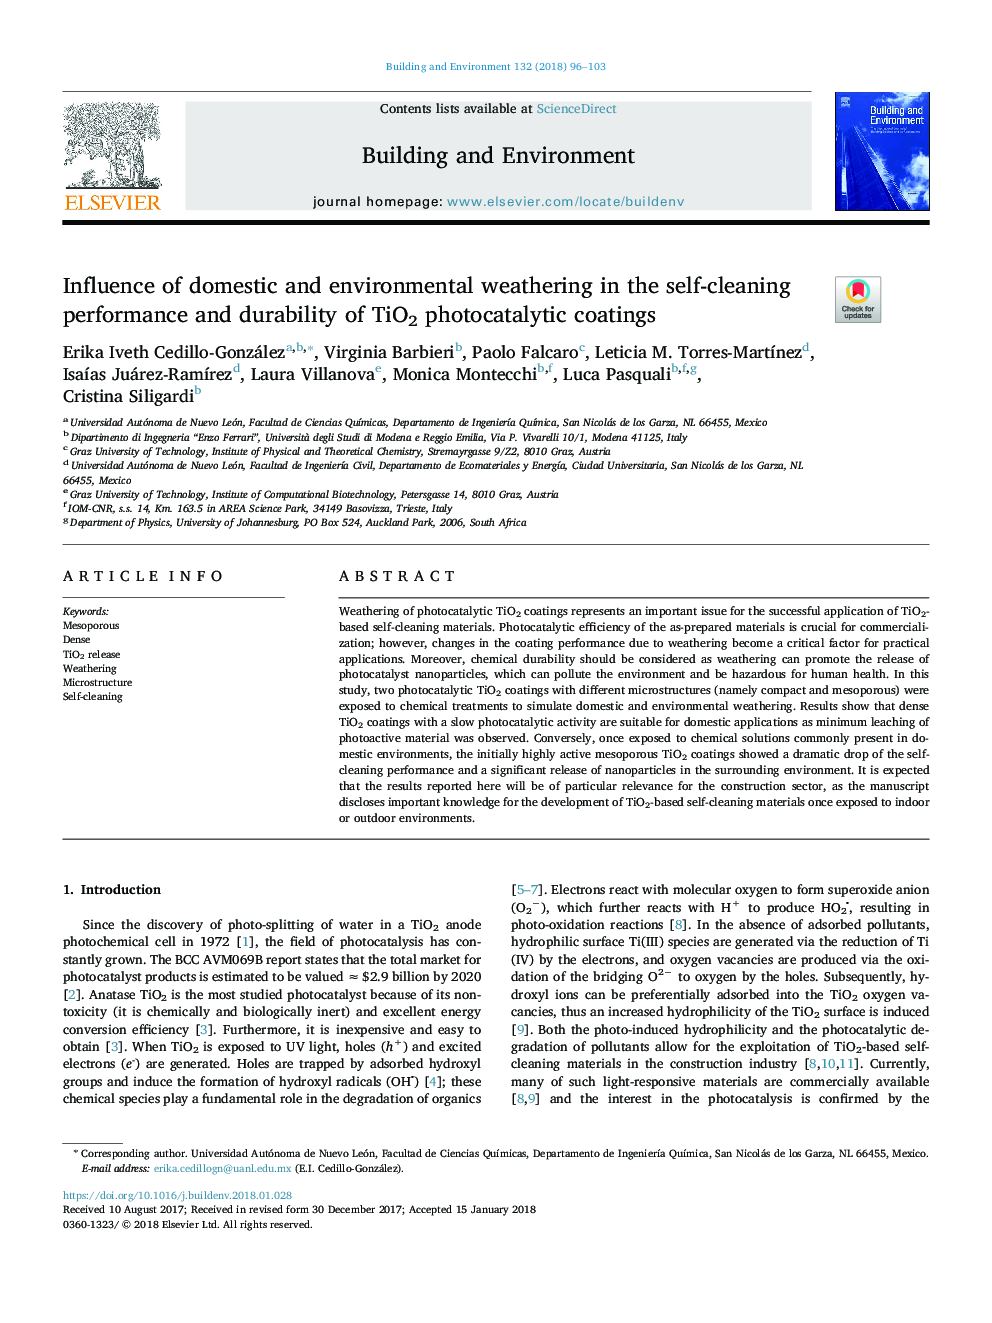 Influence of domestic and environmental weathering in the self-cleaning performance and durability of TiO2 photocatalytic coatings